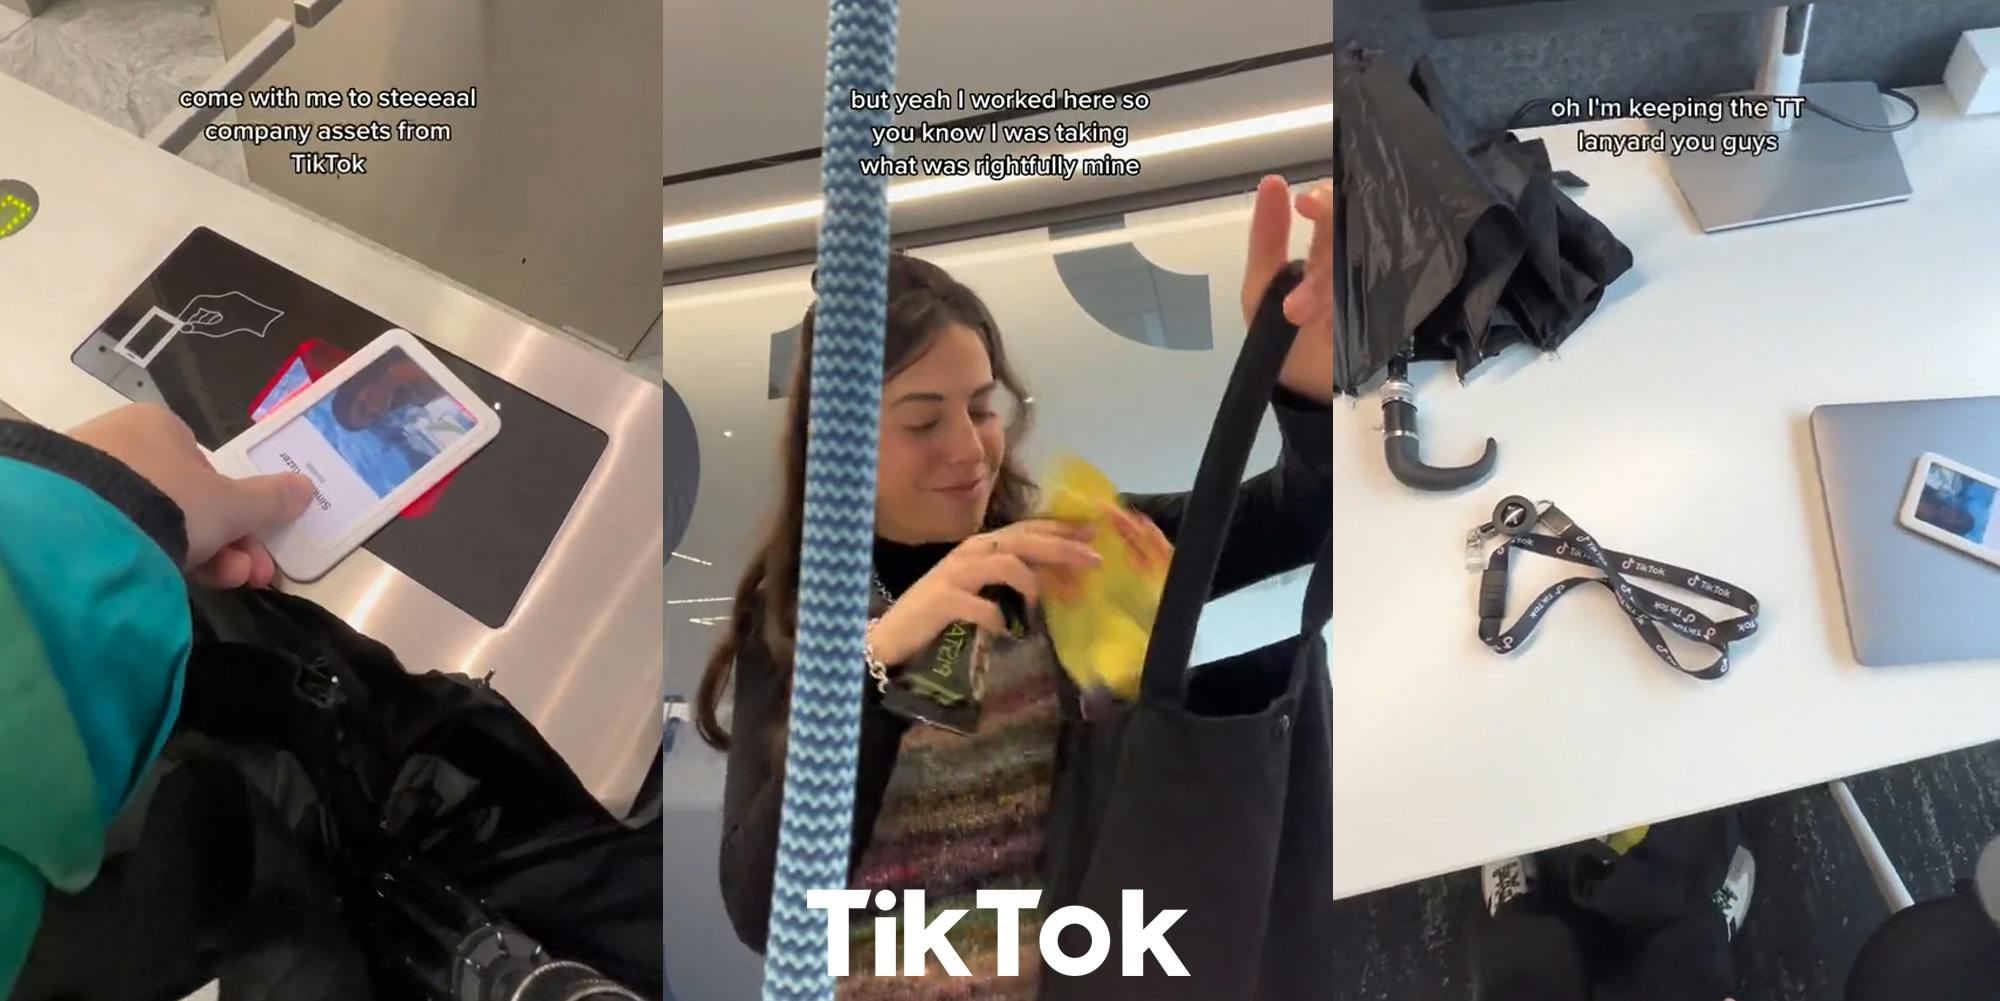 former TikTok employee scanning ID with caption "come with me to steeeeaal company assets from TikTok" (l) former TikTok employee taking snacks with caption "but yeah I worked here so you know I was taking what was rightfully mine" with TikTok logo at bottom (c) TikTok worker desk with lanyard with caption "oh I'm keeping the TT lanyard you guys" (r)